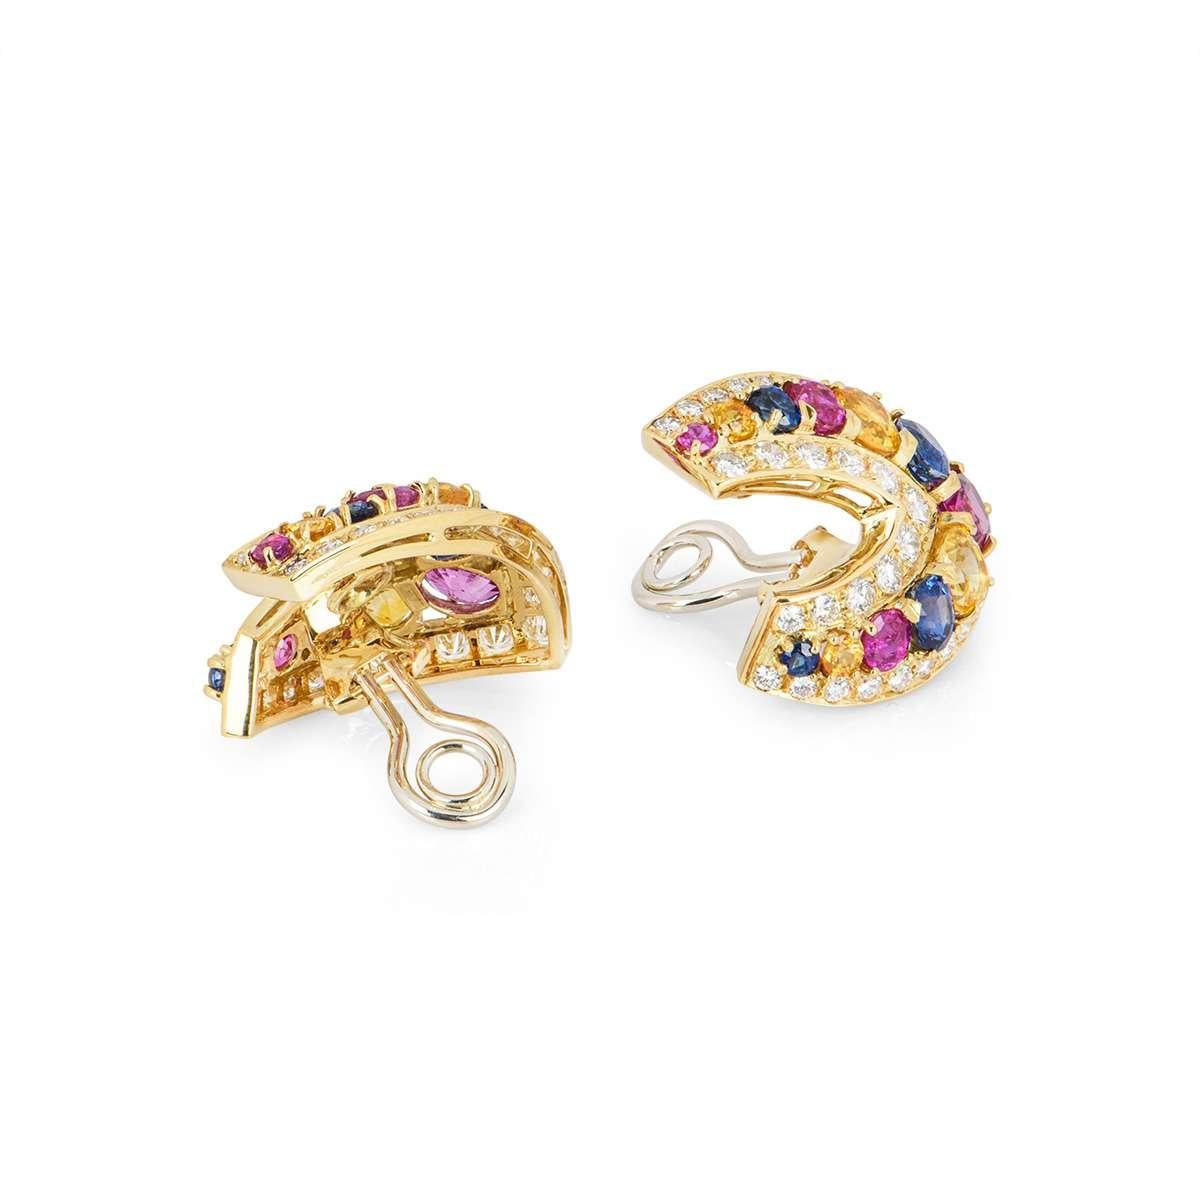 Round Cut Yellow Gold Sapphire, Multi-Gem and Diamond Clip Earrings